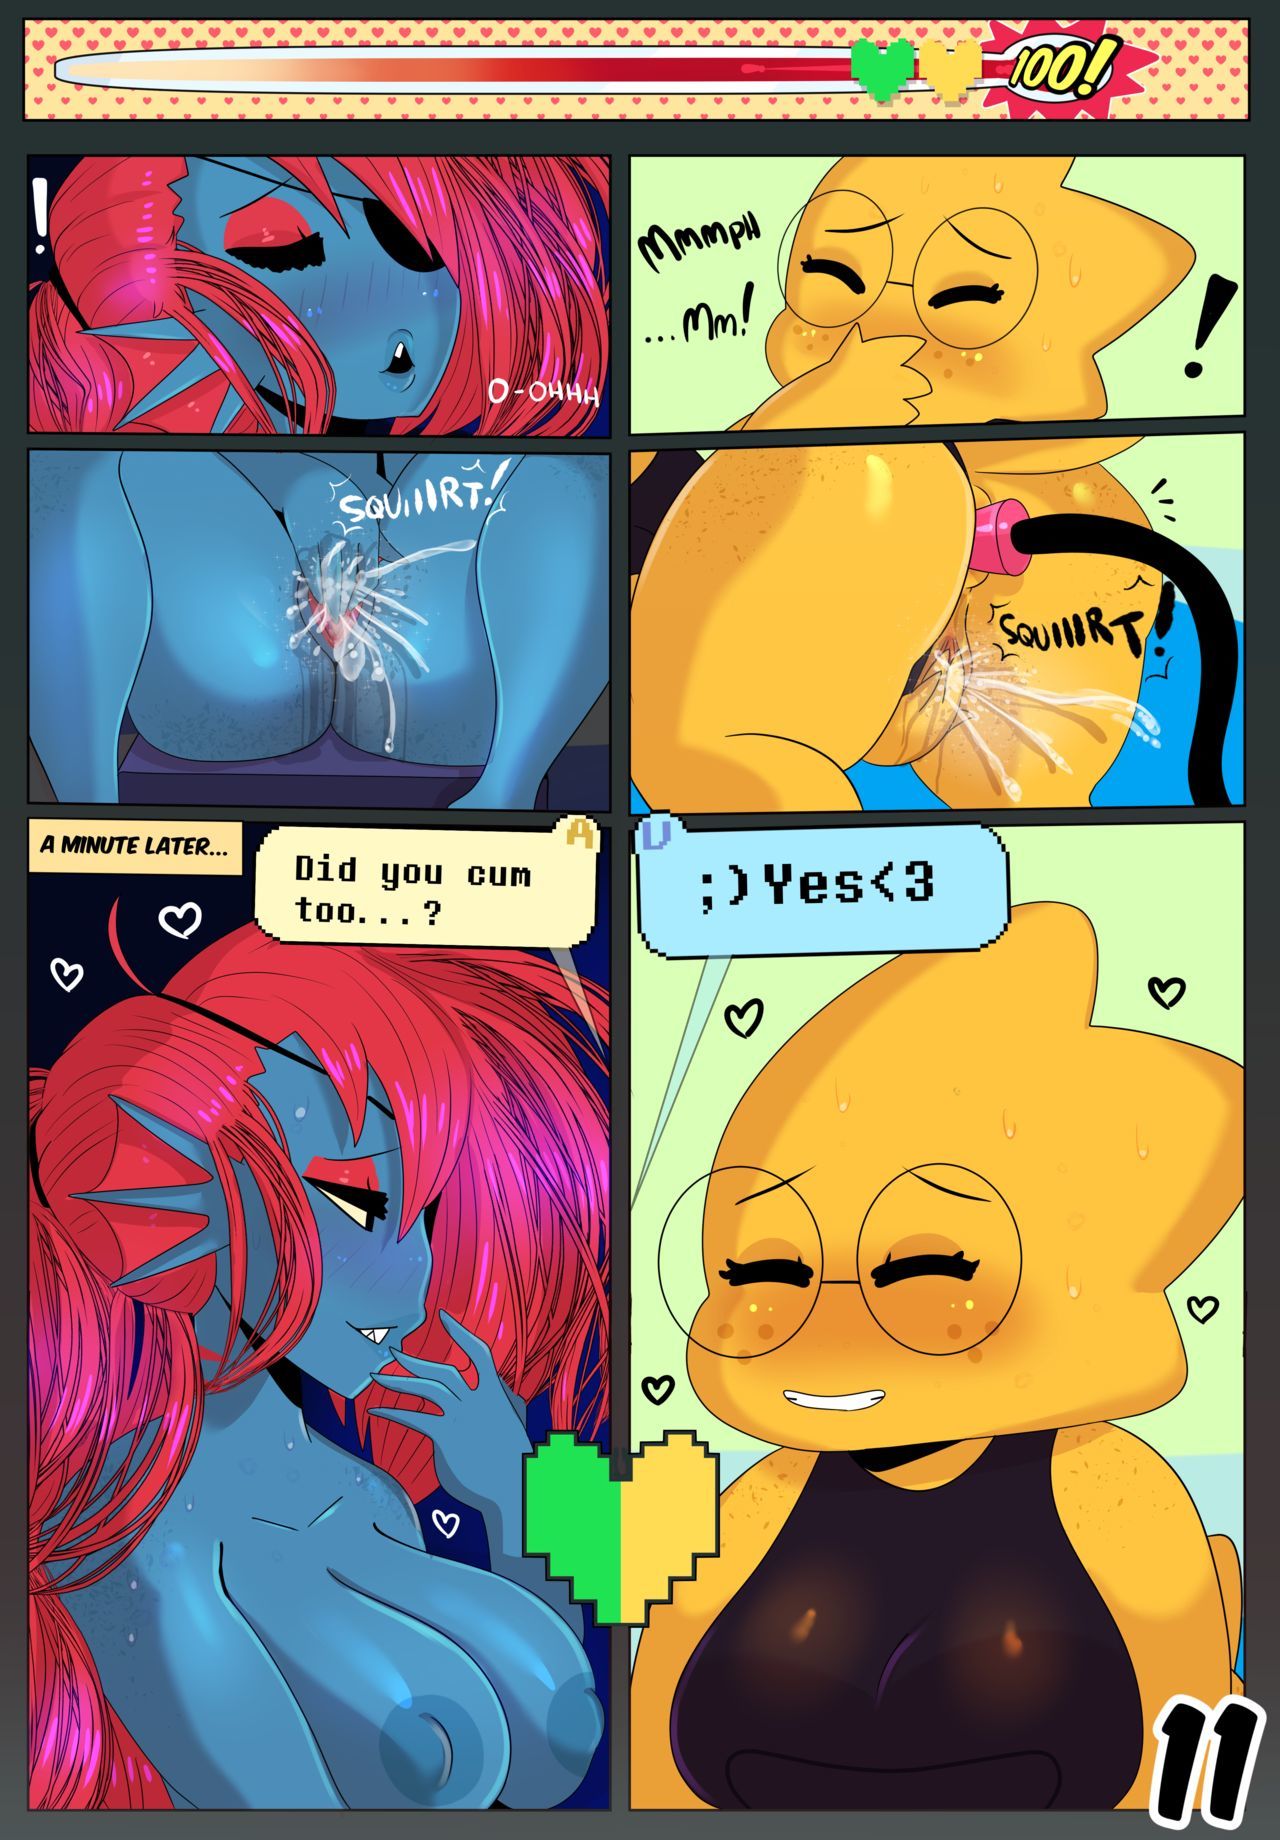 Short Distance Relationship page 1